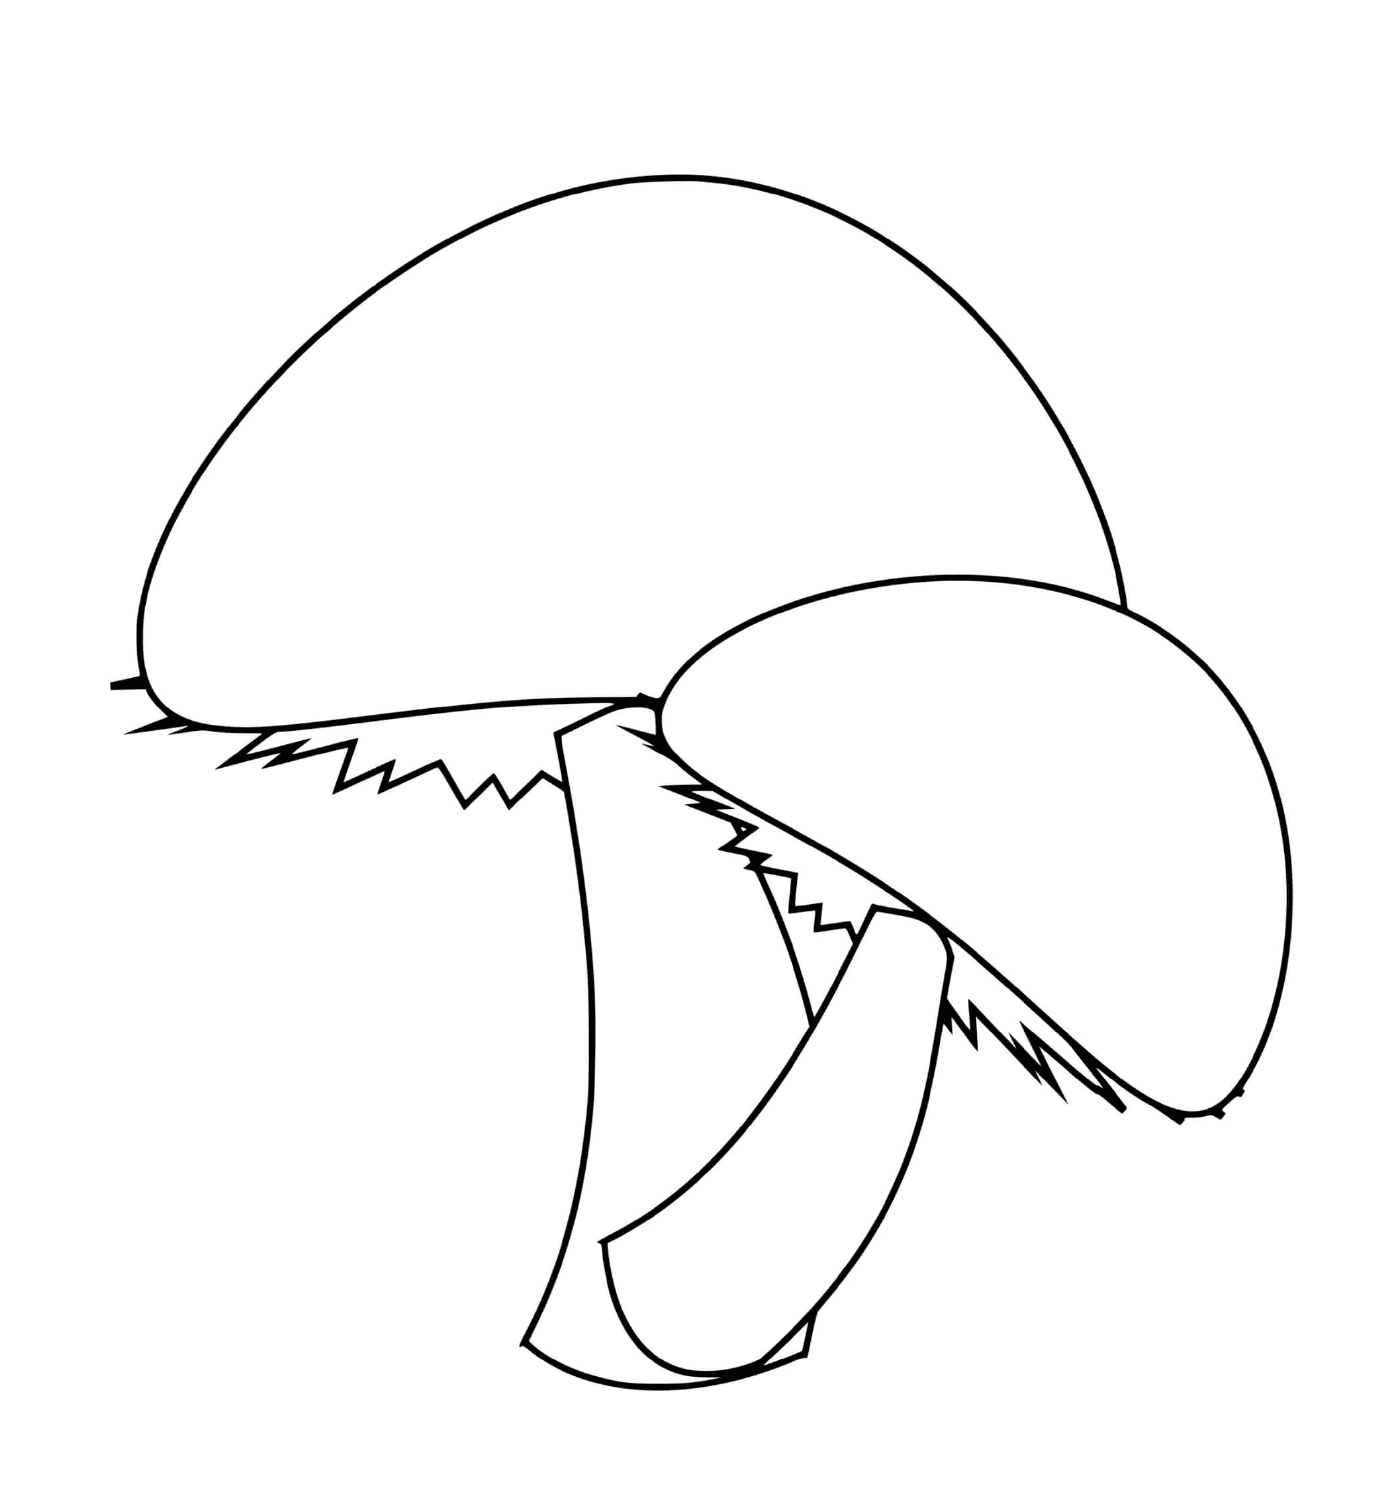  Two simple mushrooms to admire 